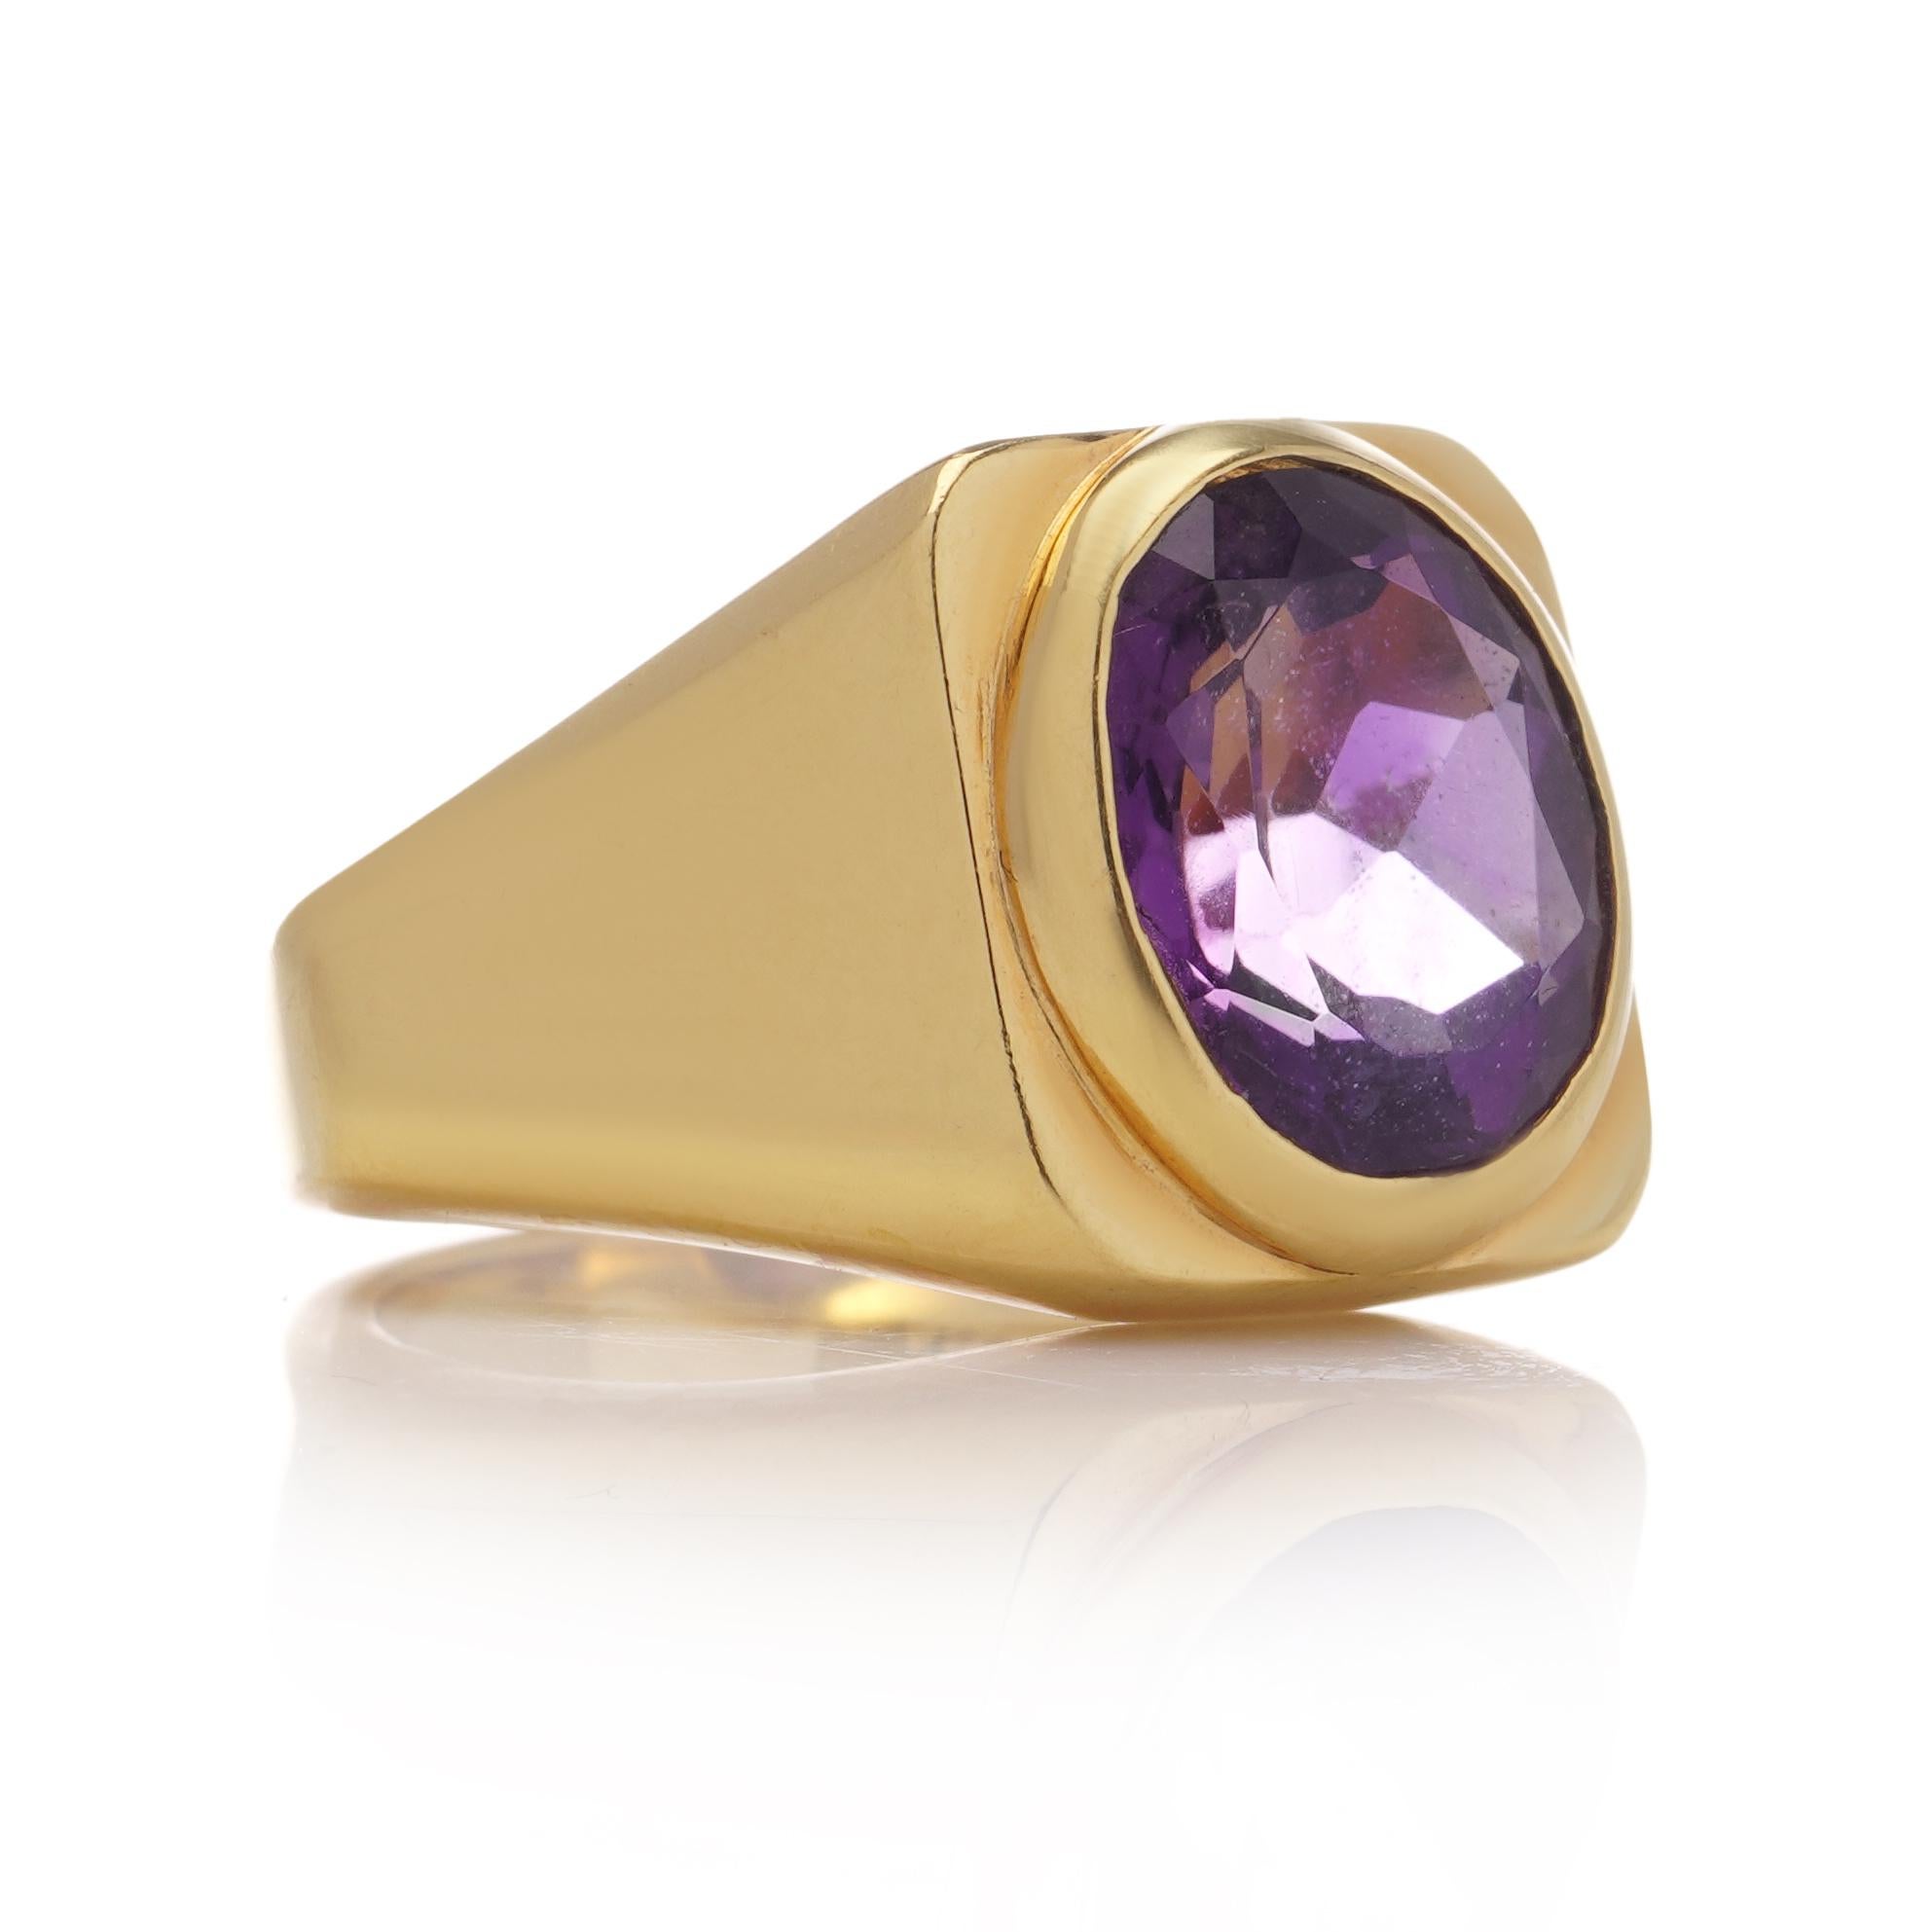 Bvlgari 22kt. yellow gold geometric band ring set with an oval-cut amethyst For Sale 3